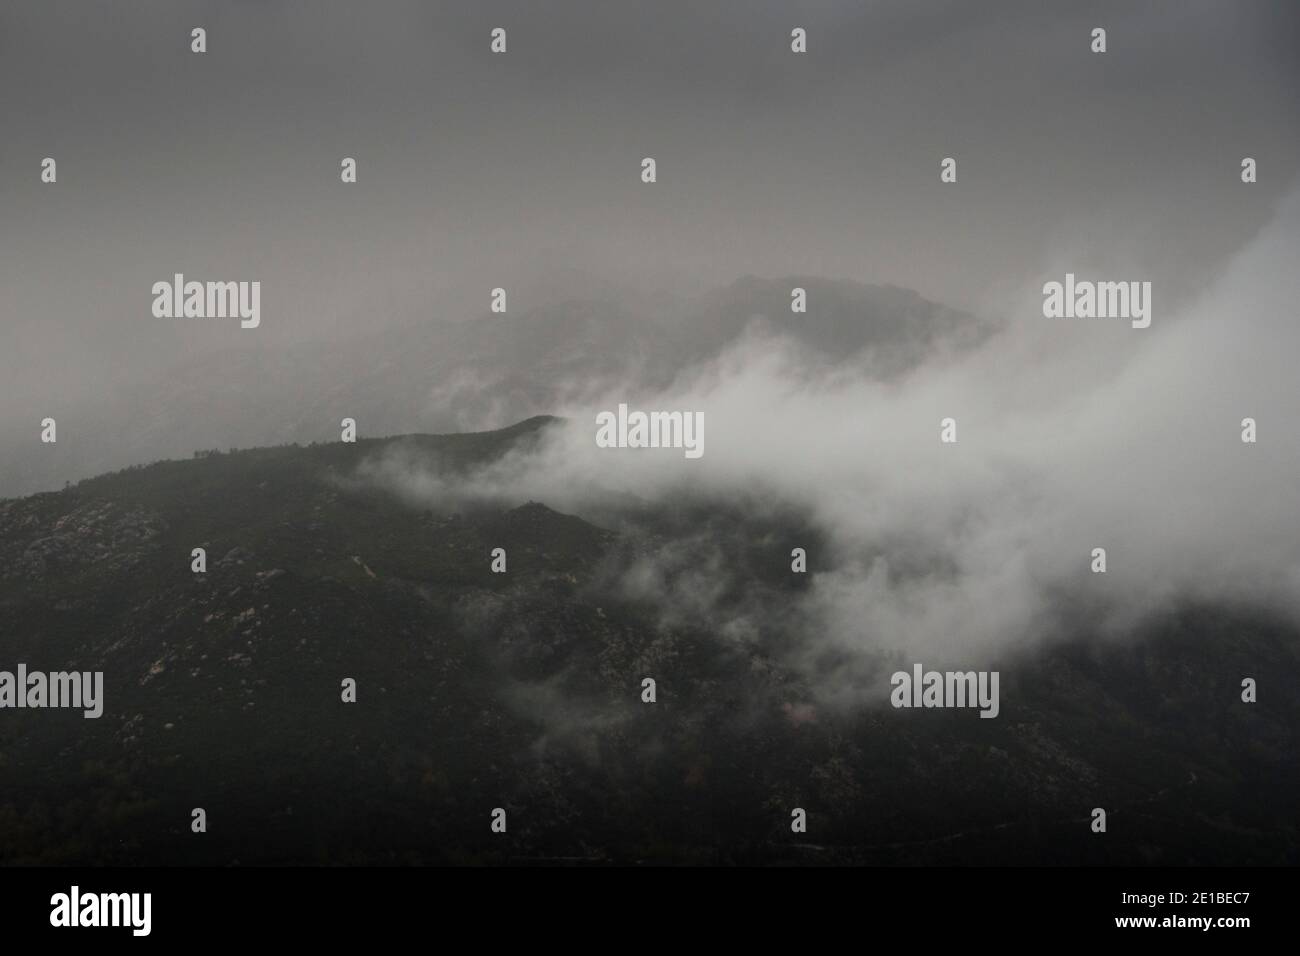 Low clouds lifting up from the mountains in a dark rainy day Stock Photo